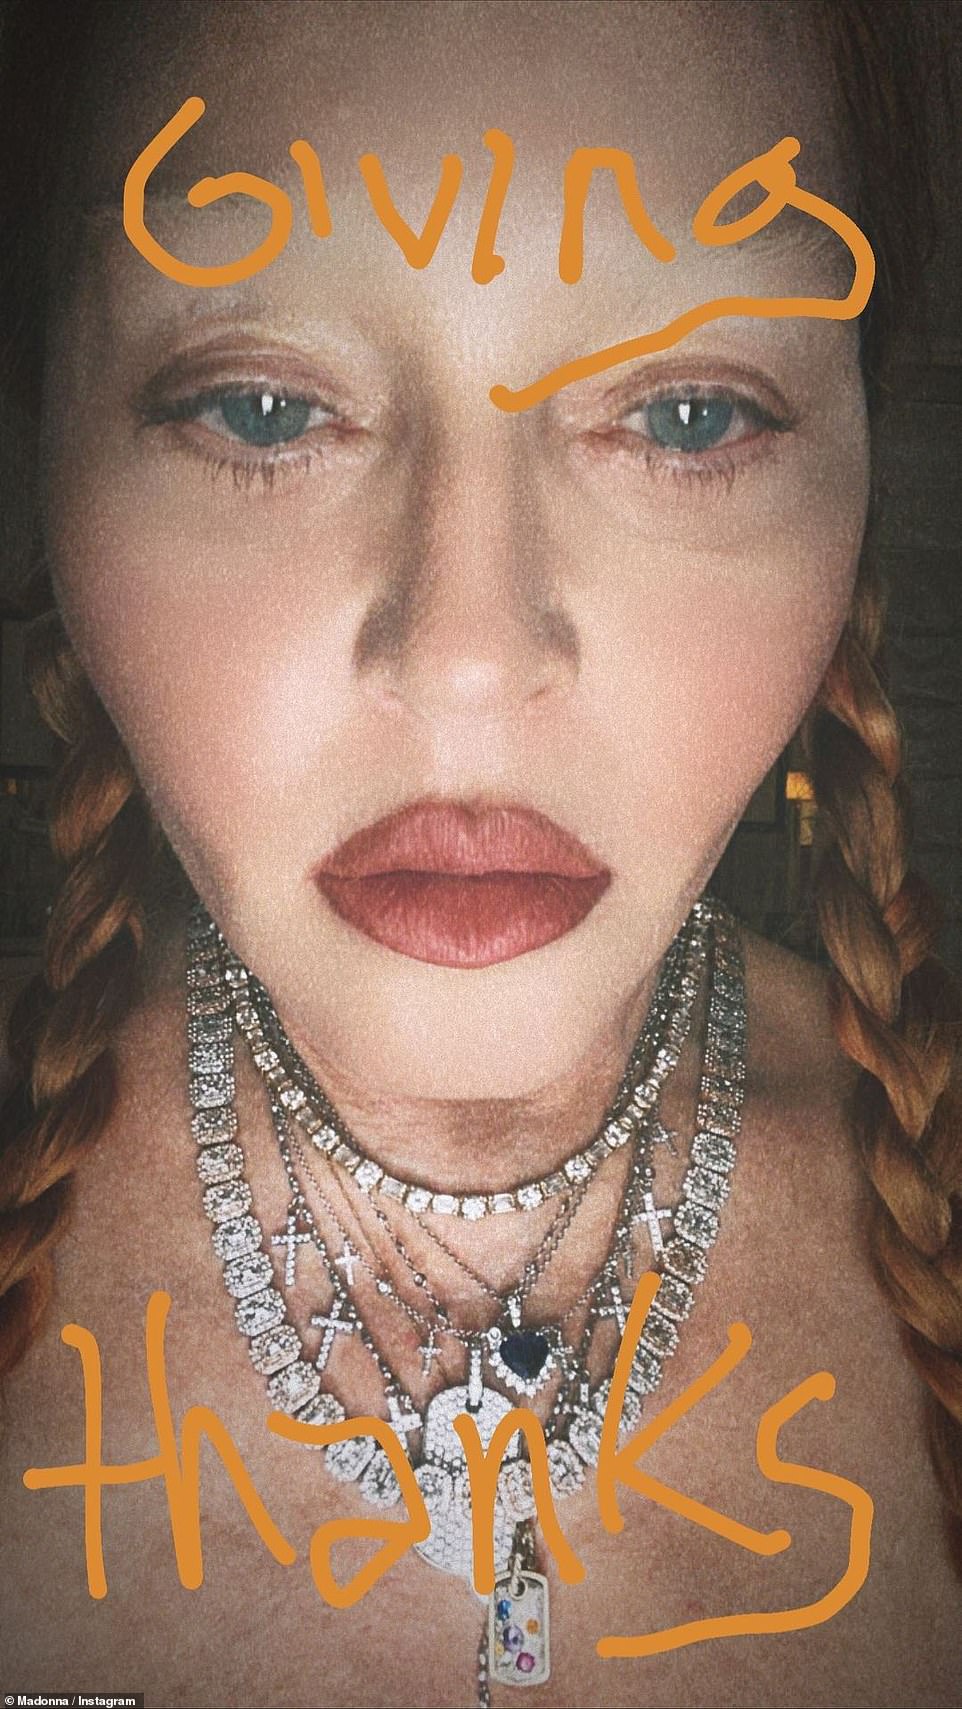 Giving thanks: Singer Madonna, 64, shared a flawless close-up of her face with orange writing spelling out 'giving thanks'